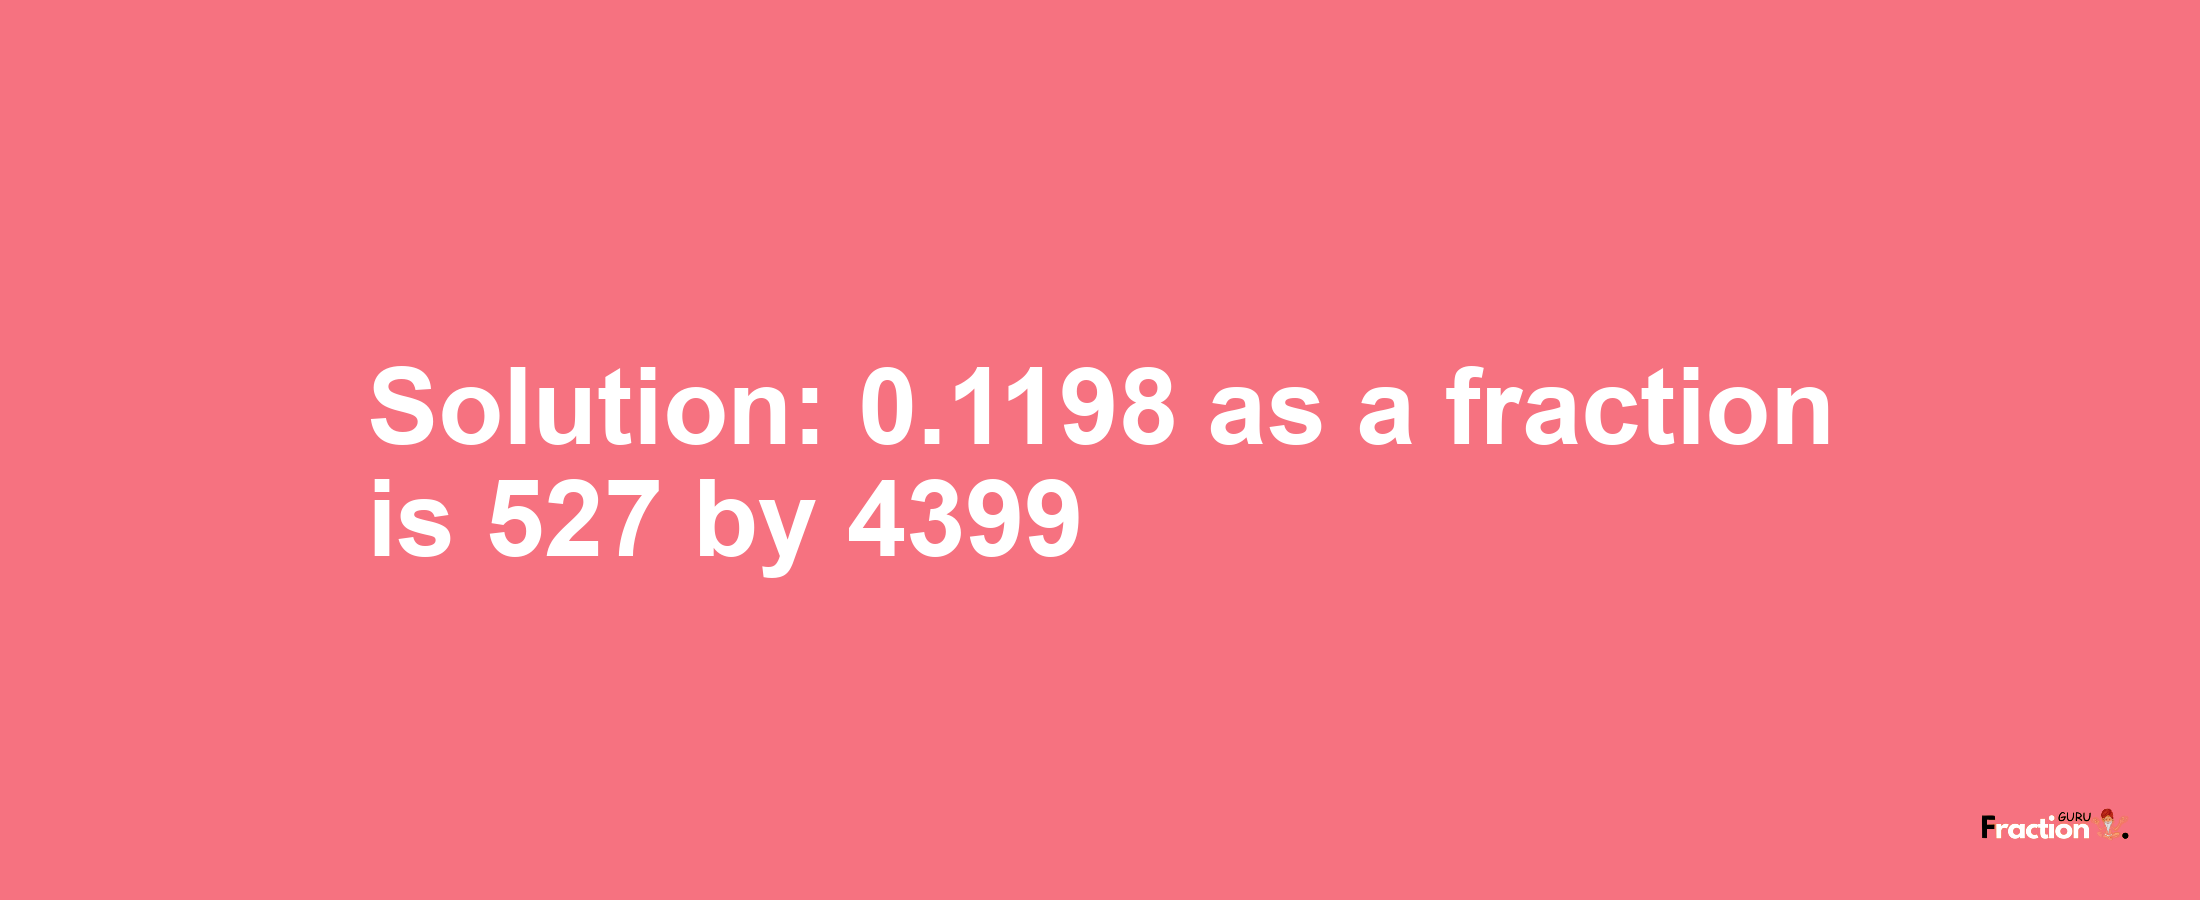 Solution:0.1198 as a fraction is 527/4399